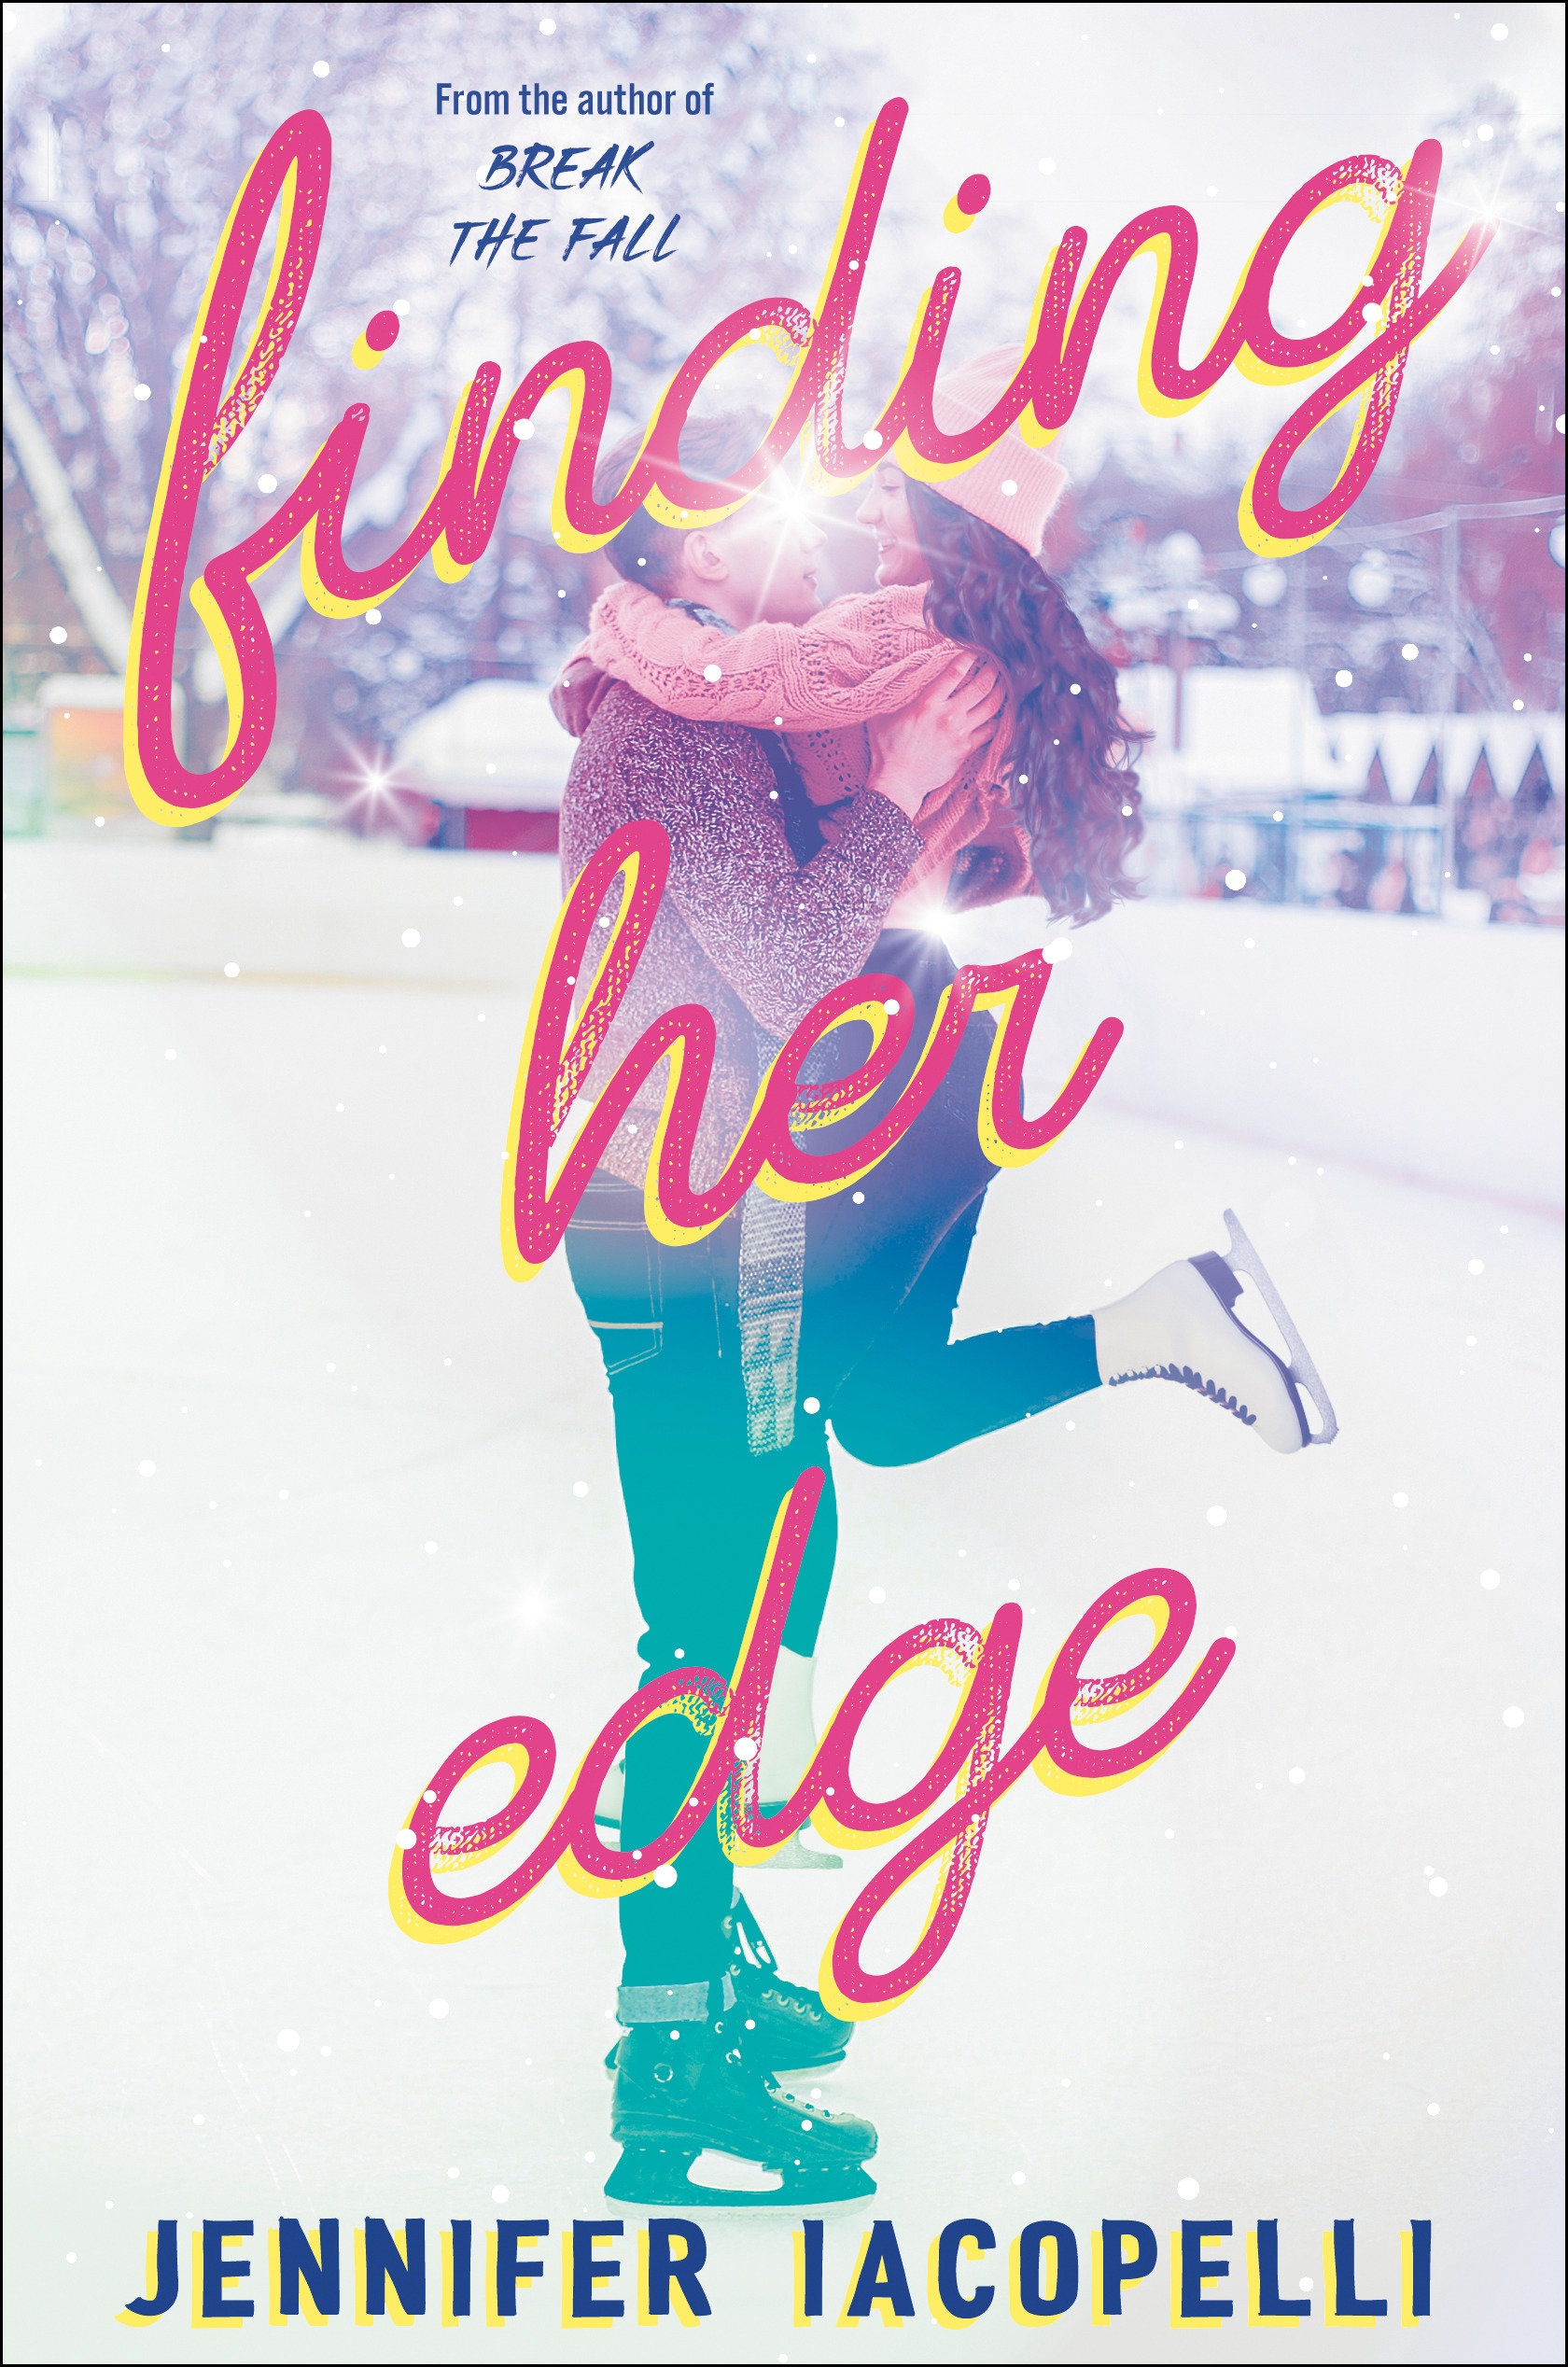 Finding Her Edge (Hardcover Book)